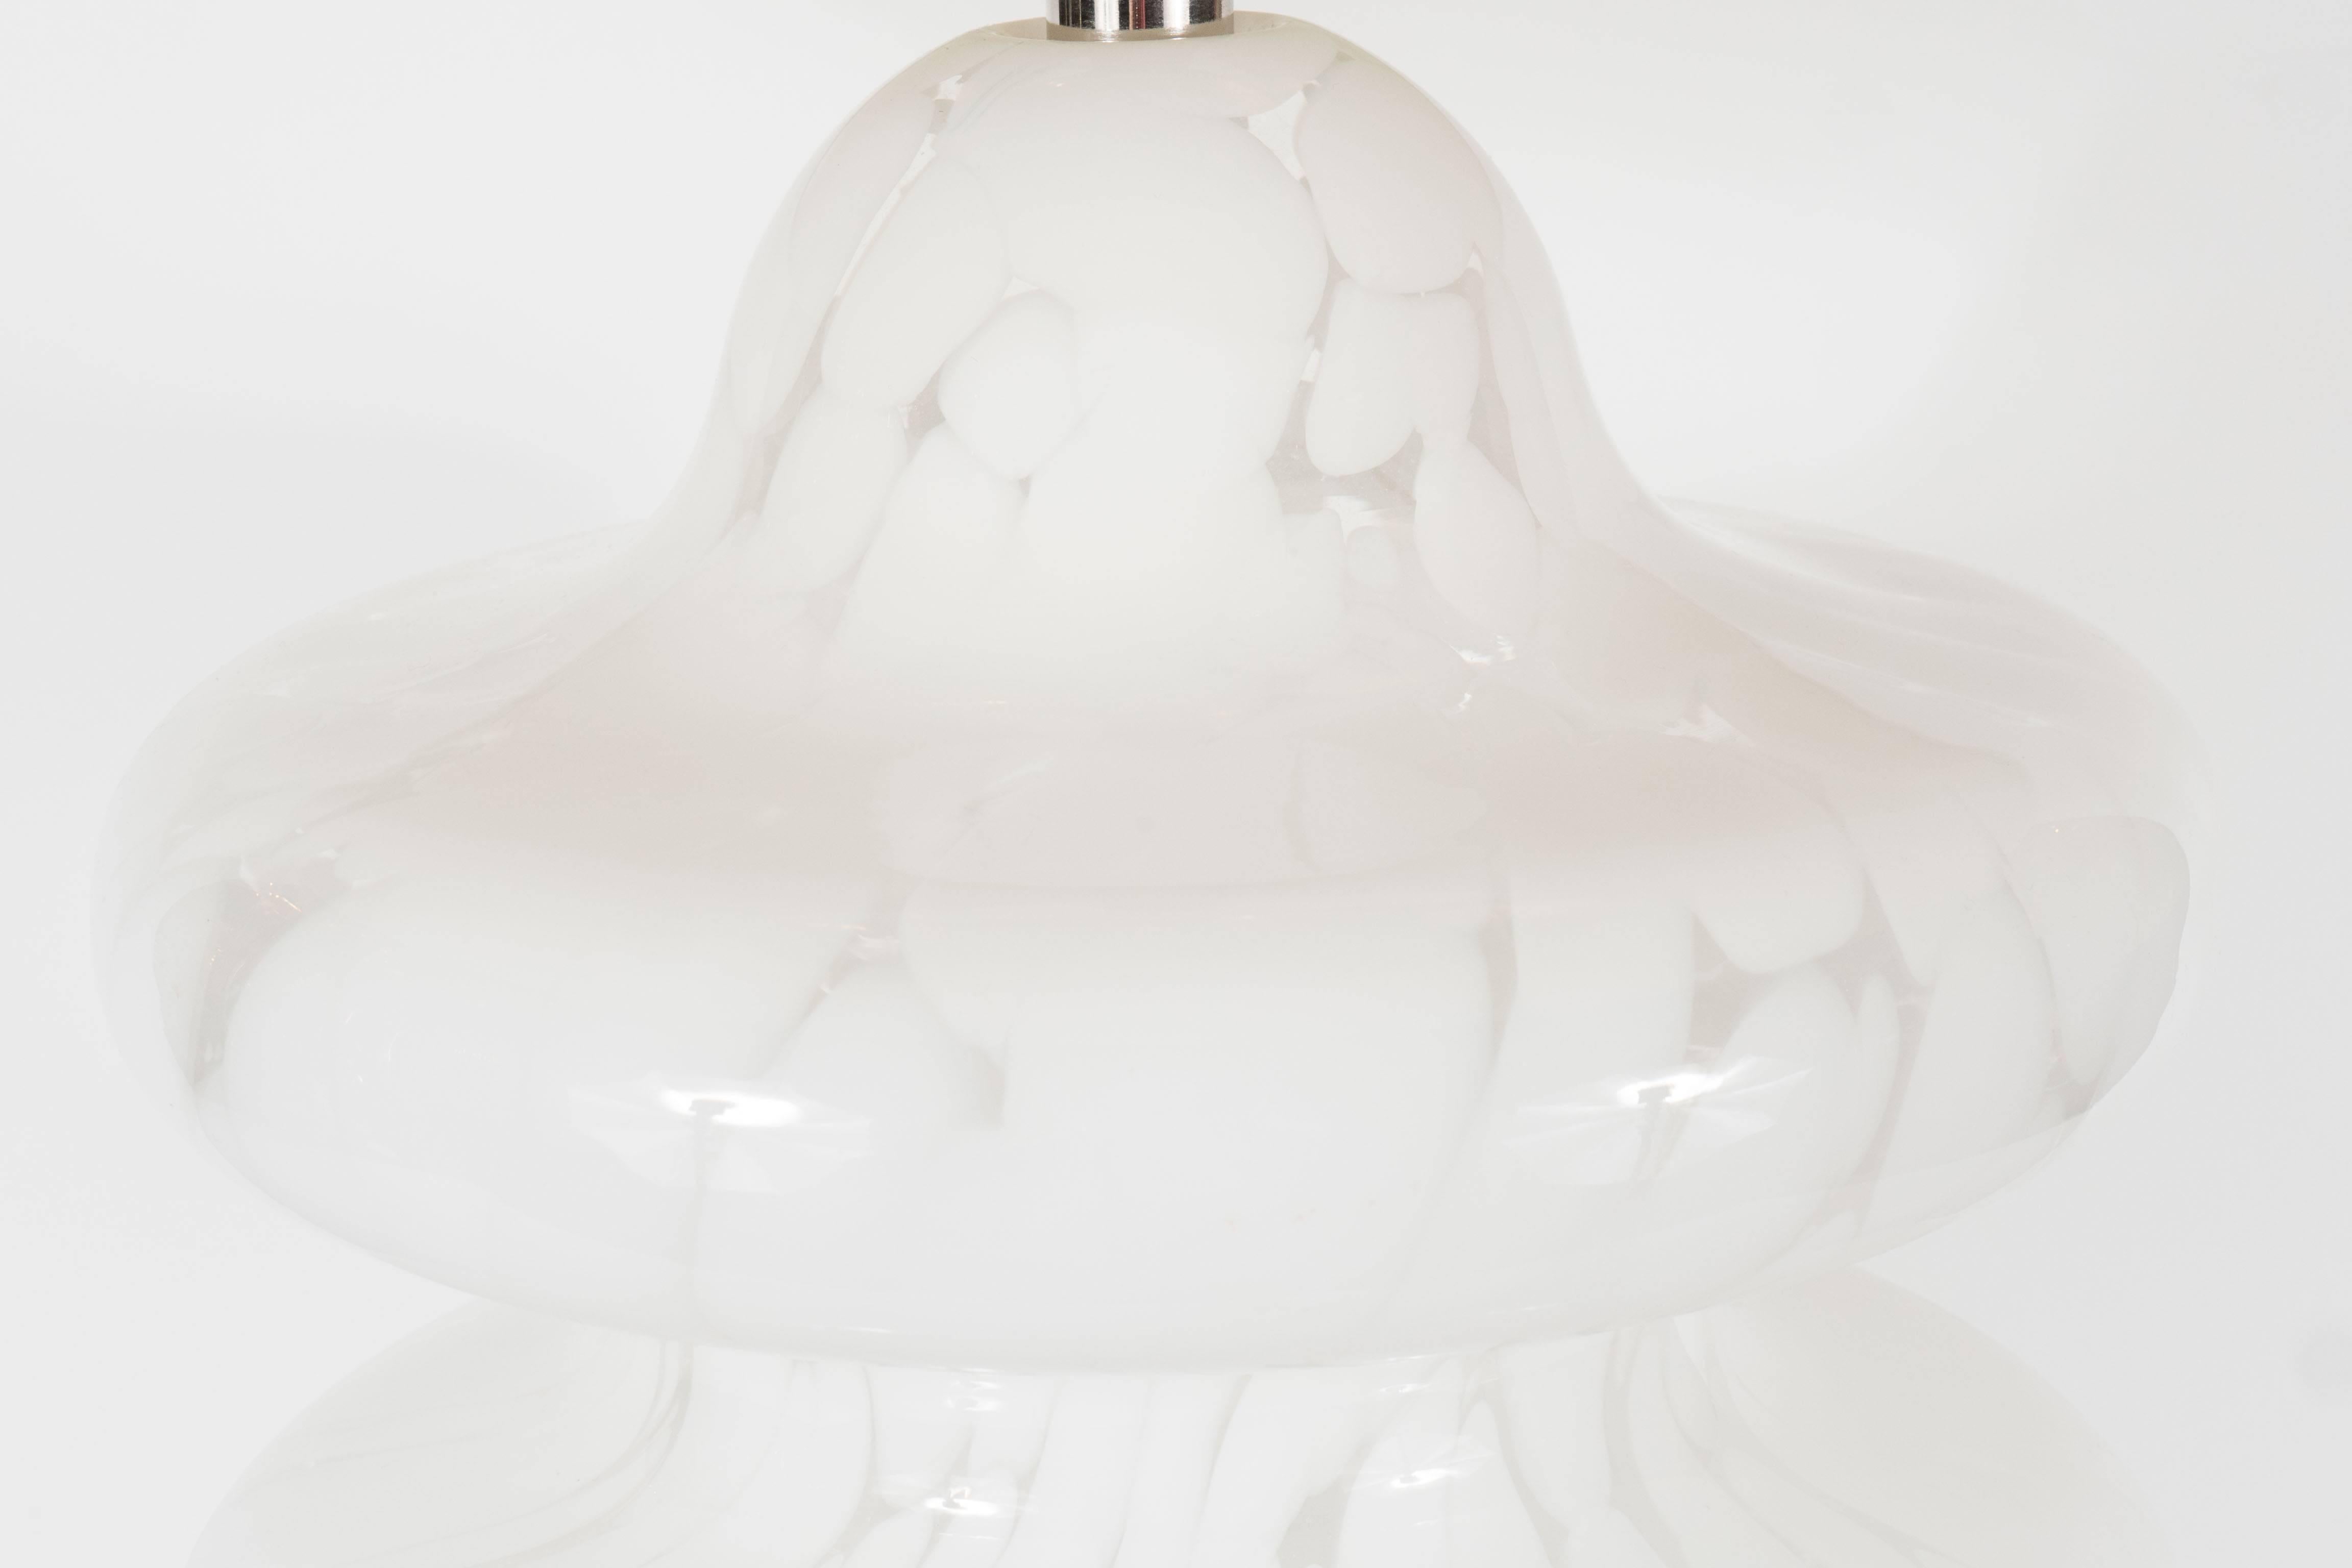 A Mid-Century Modernist table lamp in frosted and satin Murano glass with polished chrome base by Vistosi. Flowing curves of mottled glass give this piece an airy disposition with a TOTEM like form. A chrome base supports the sculptural piece. It